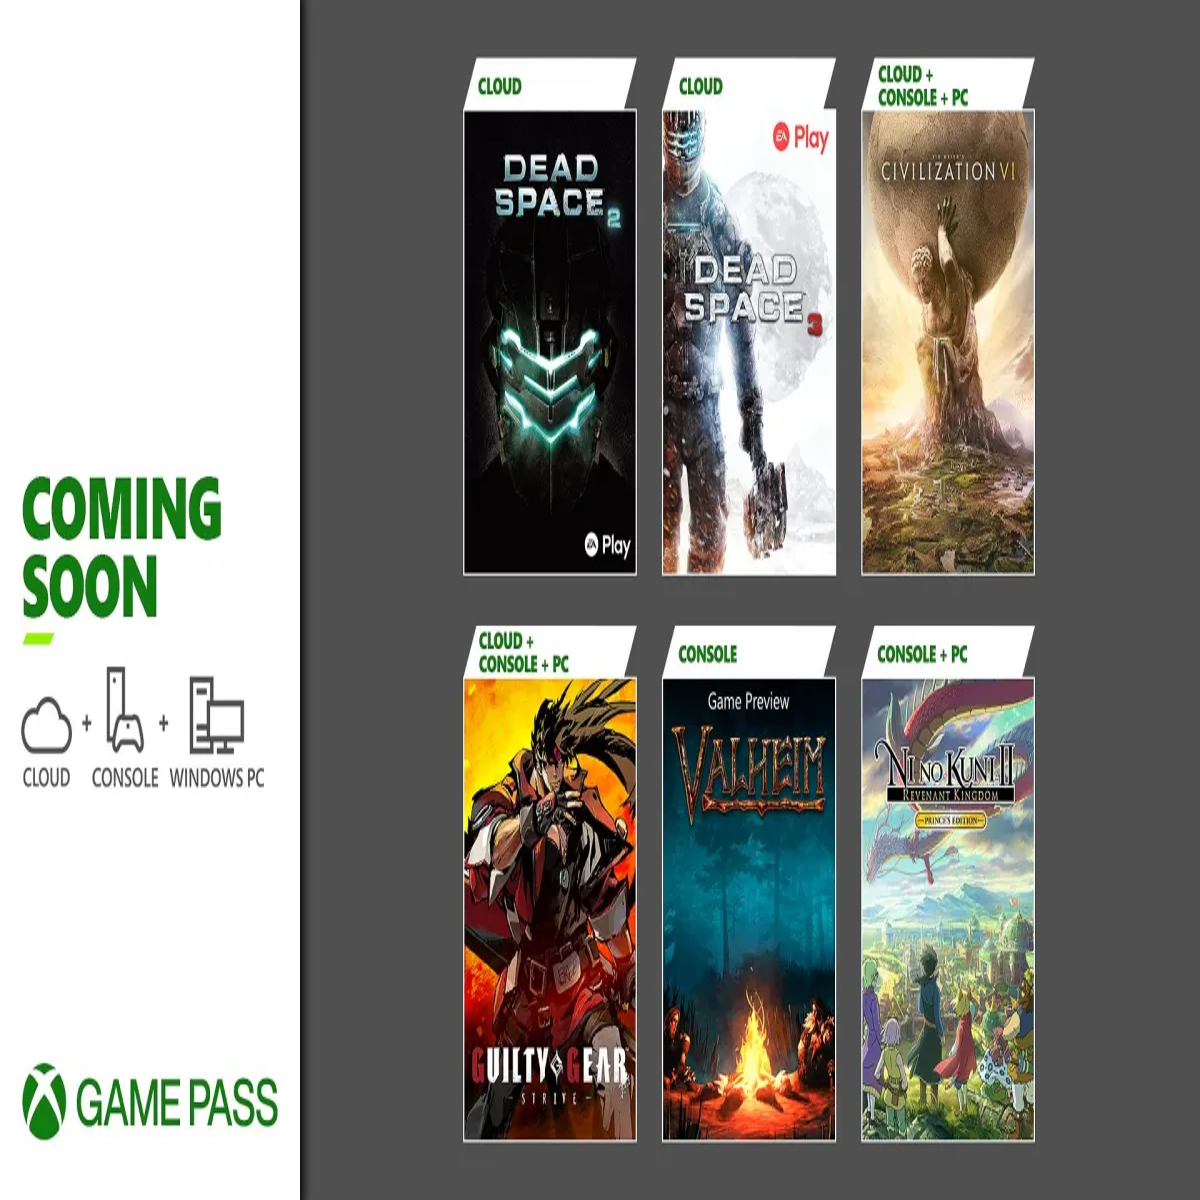 Xbox Game Pass has nine more games coming to PC in December